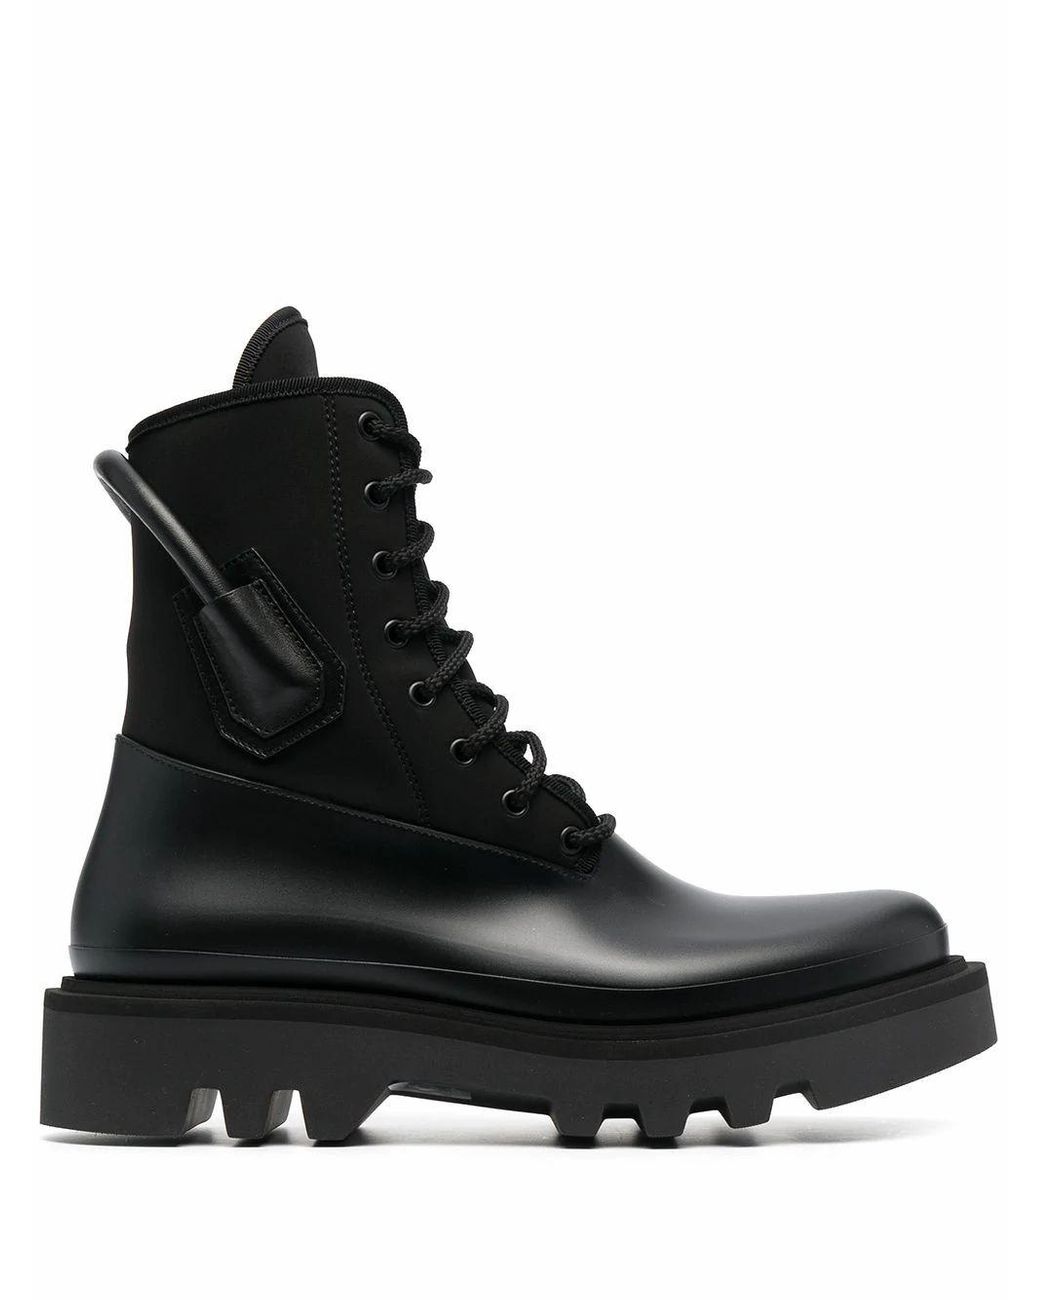 Givenchy Ankle Boots in Black for Men - Lyst